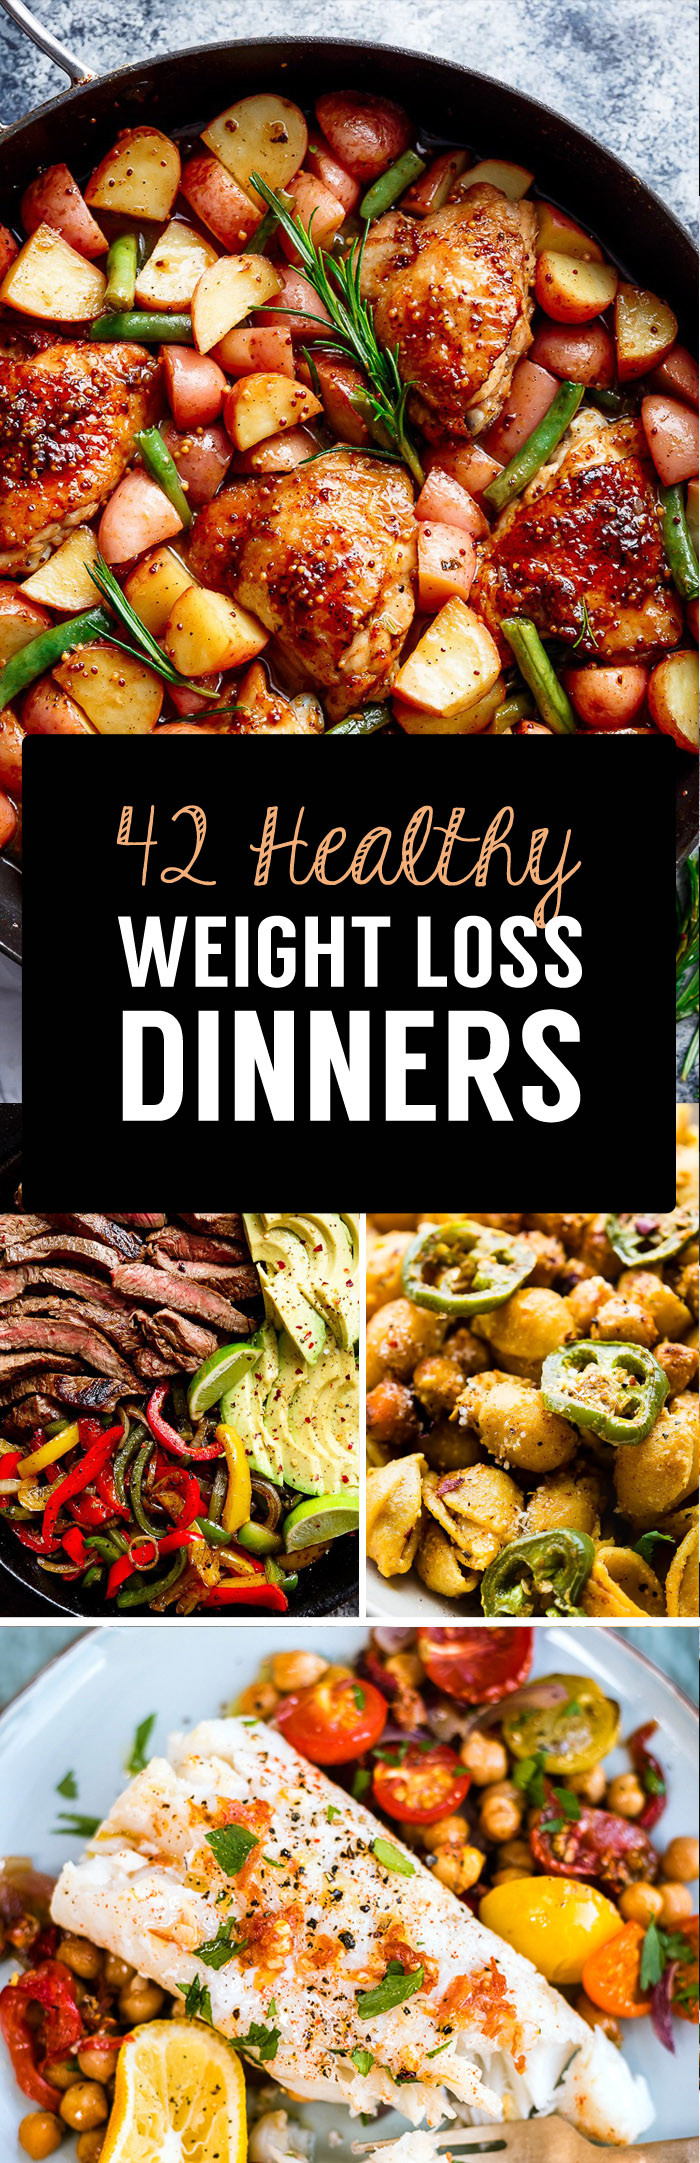 Dinner Ideas For Weight Loss
 117 Weight Loss Meal Recipes For Every Time The Day